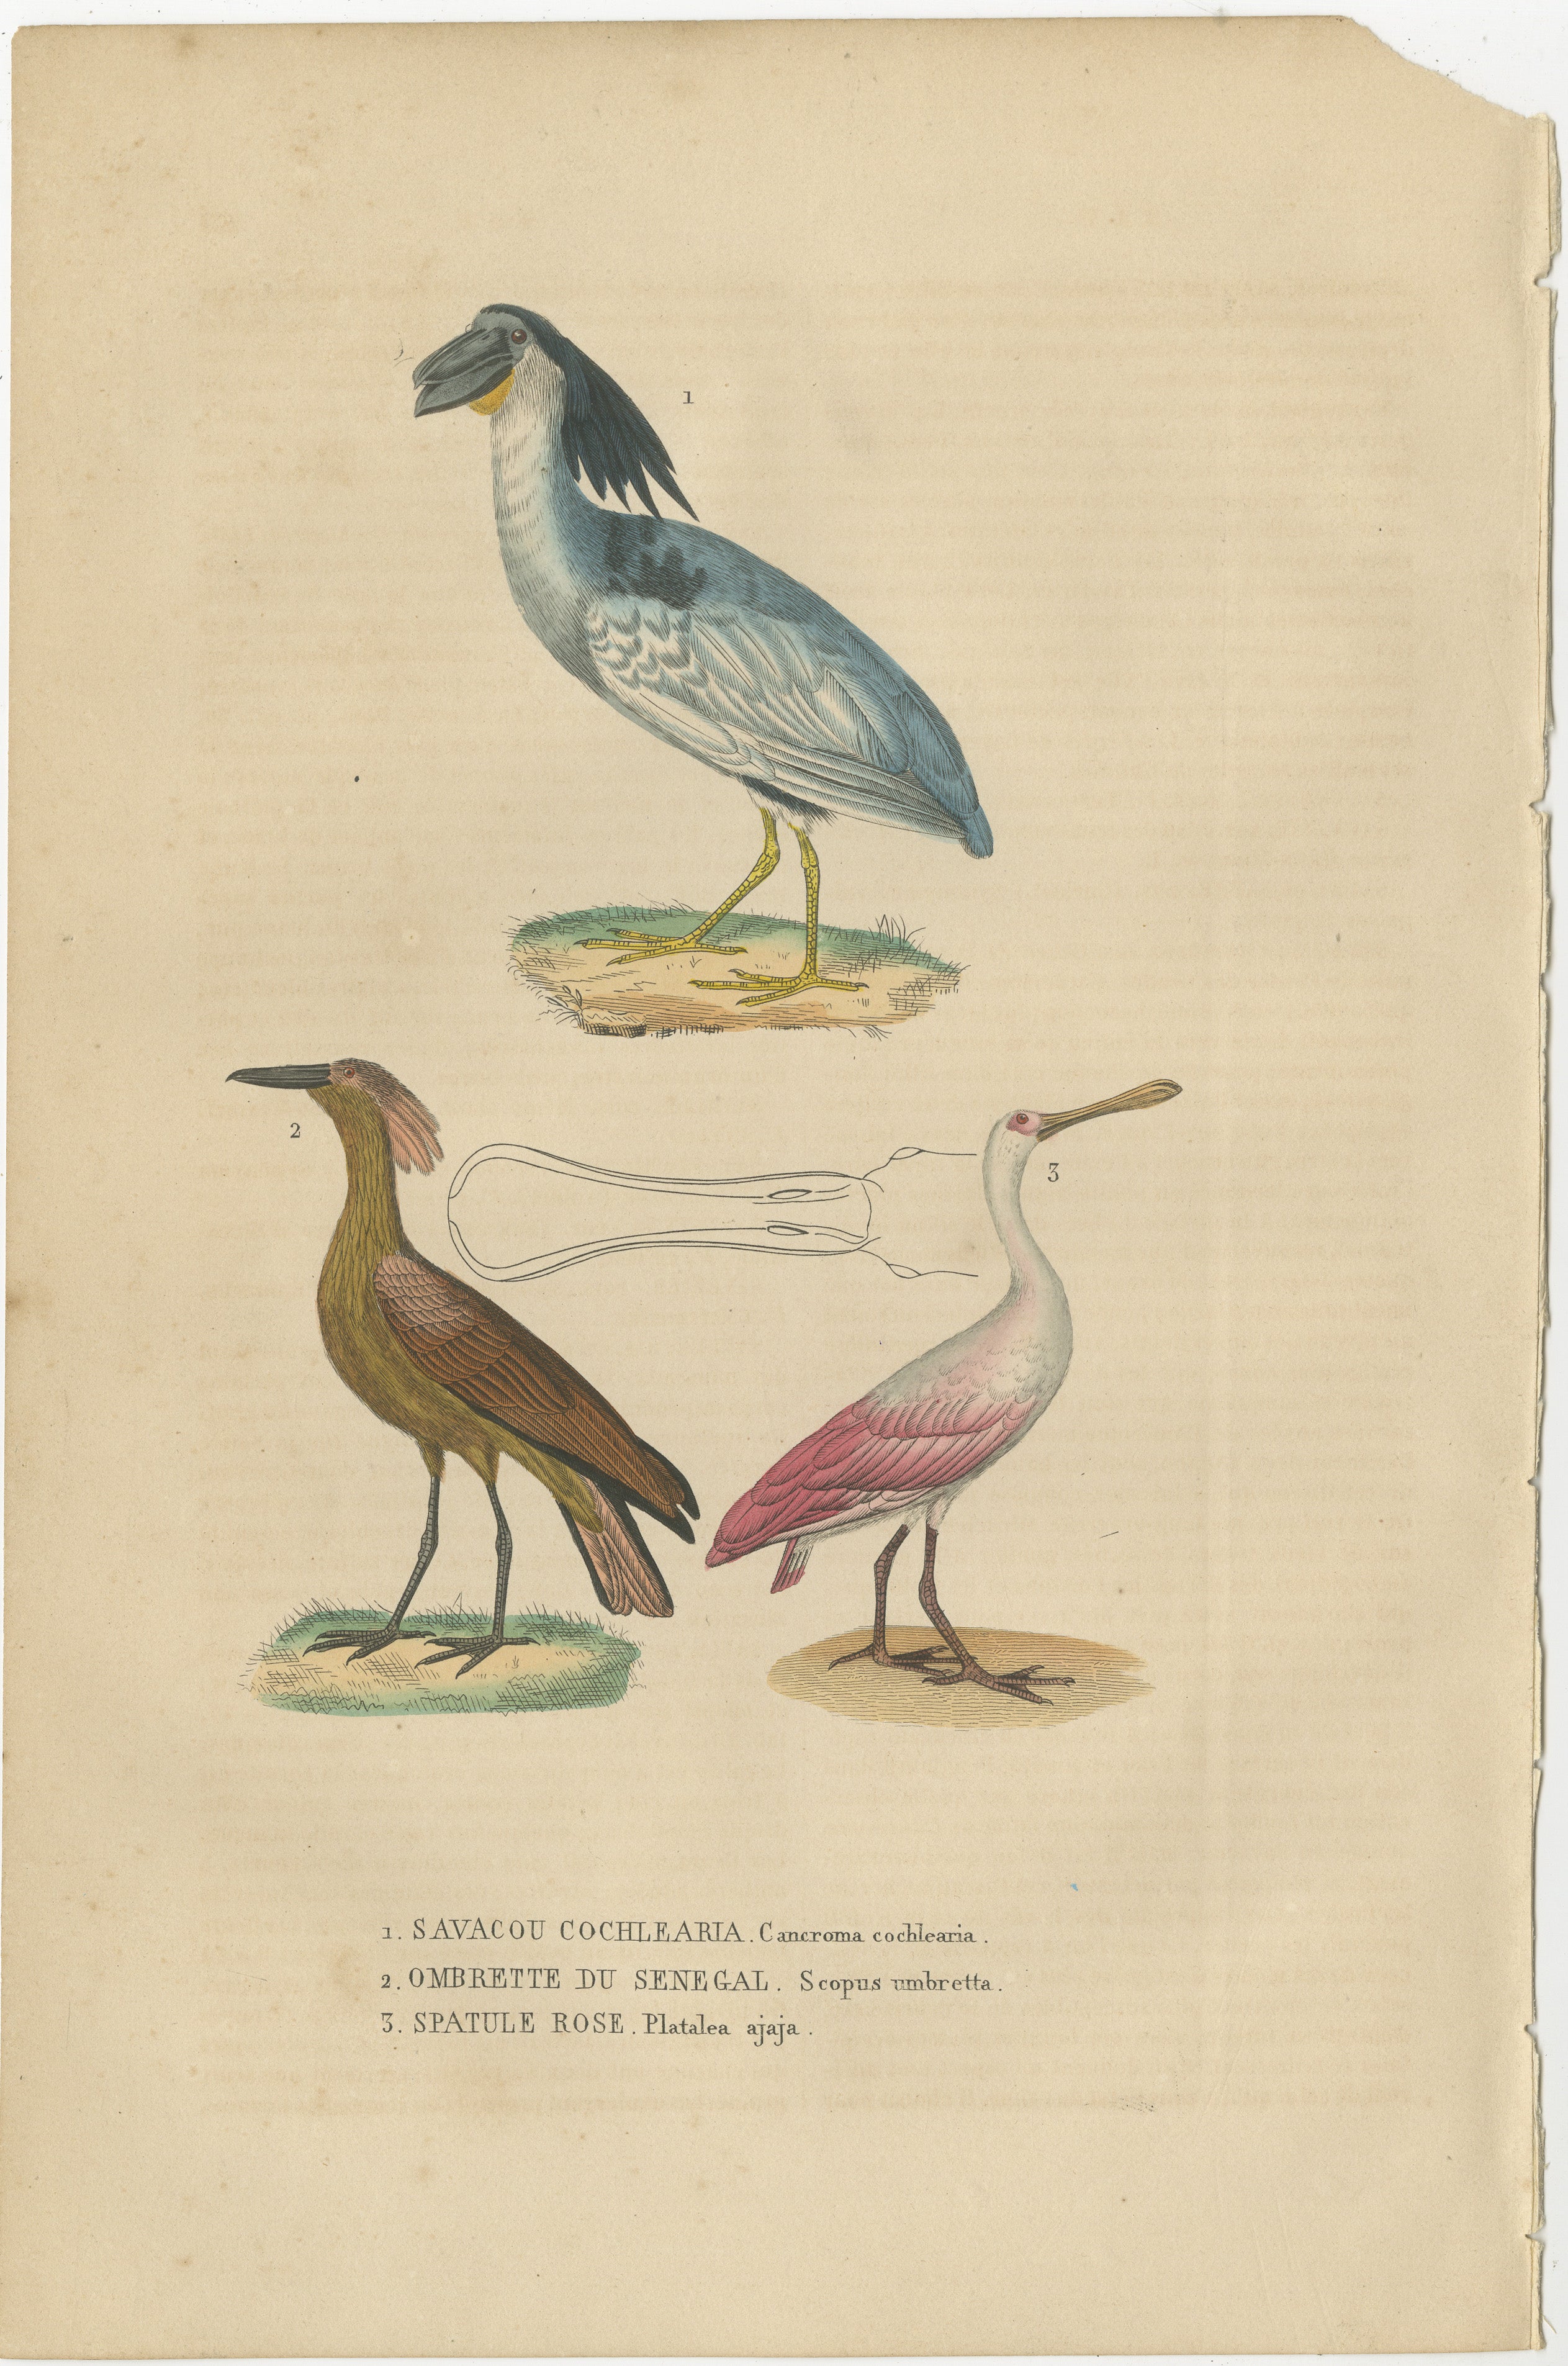 1. CANCROMA COCHLEARIA – SAVACOU COCHLEARIA, 2. SCOPUS UMBRETTA – OMBRETTO DU SENEGAL, 3. PLATALEA AJAJA – SPATULE ROSE.

The antique print showcases three vividly depicted bird species: the Canchroma Cochlearia and Savacou Cochlearia (likely